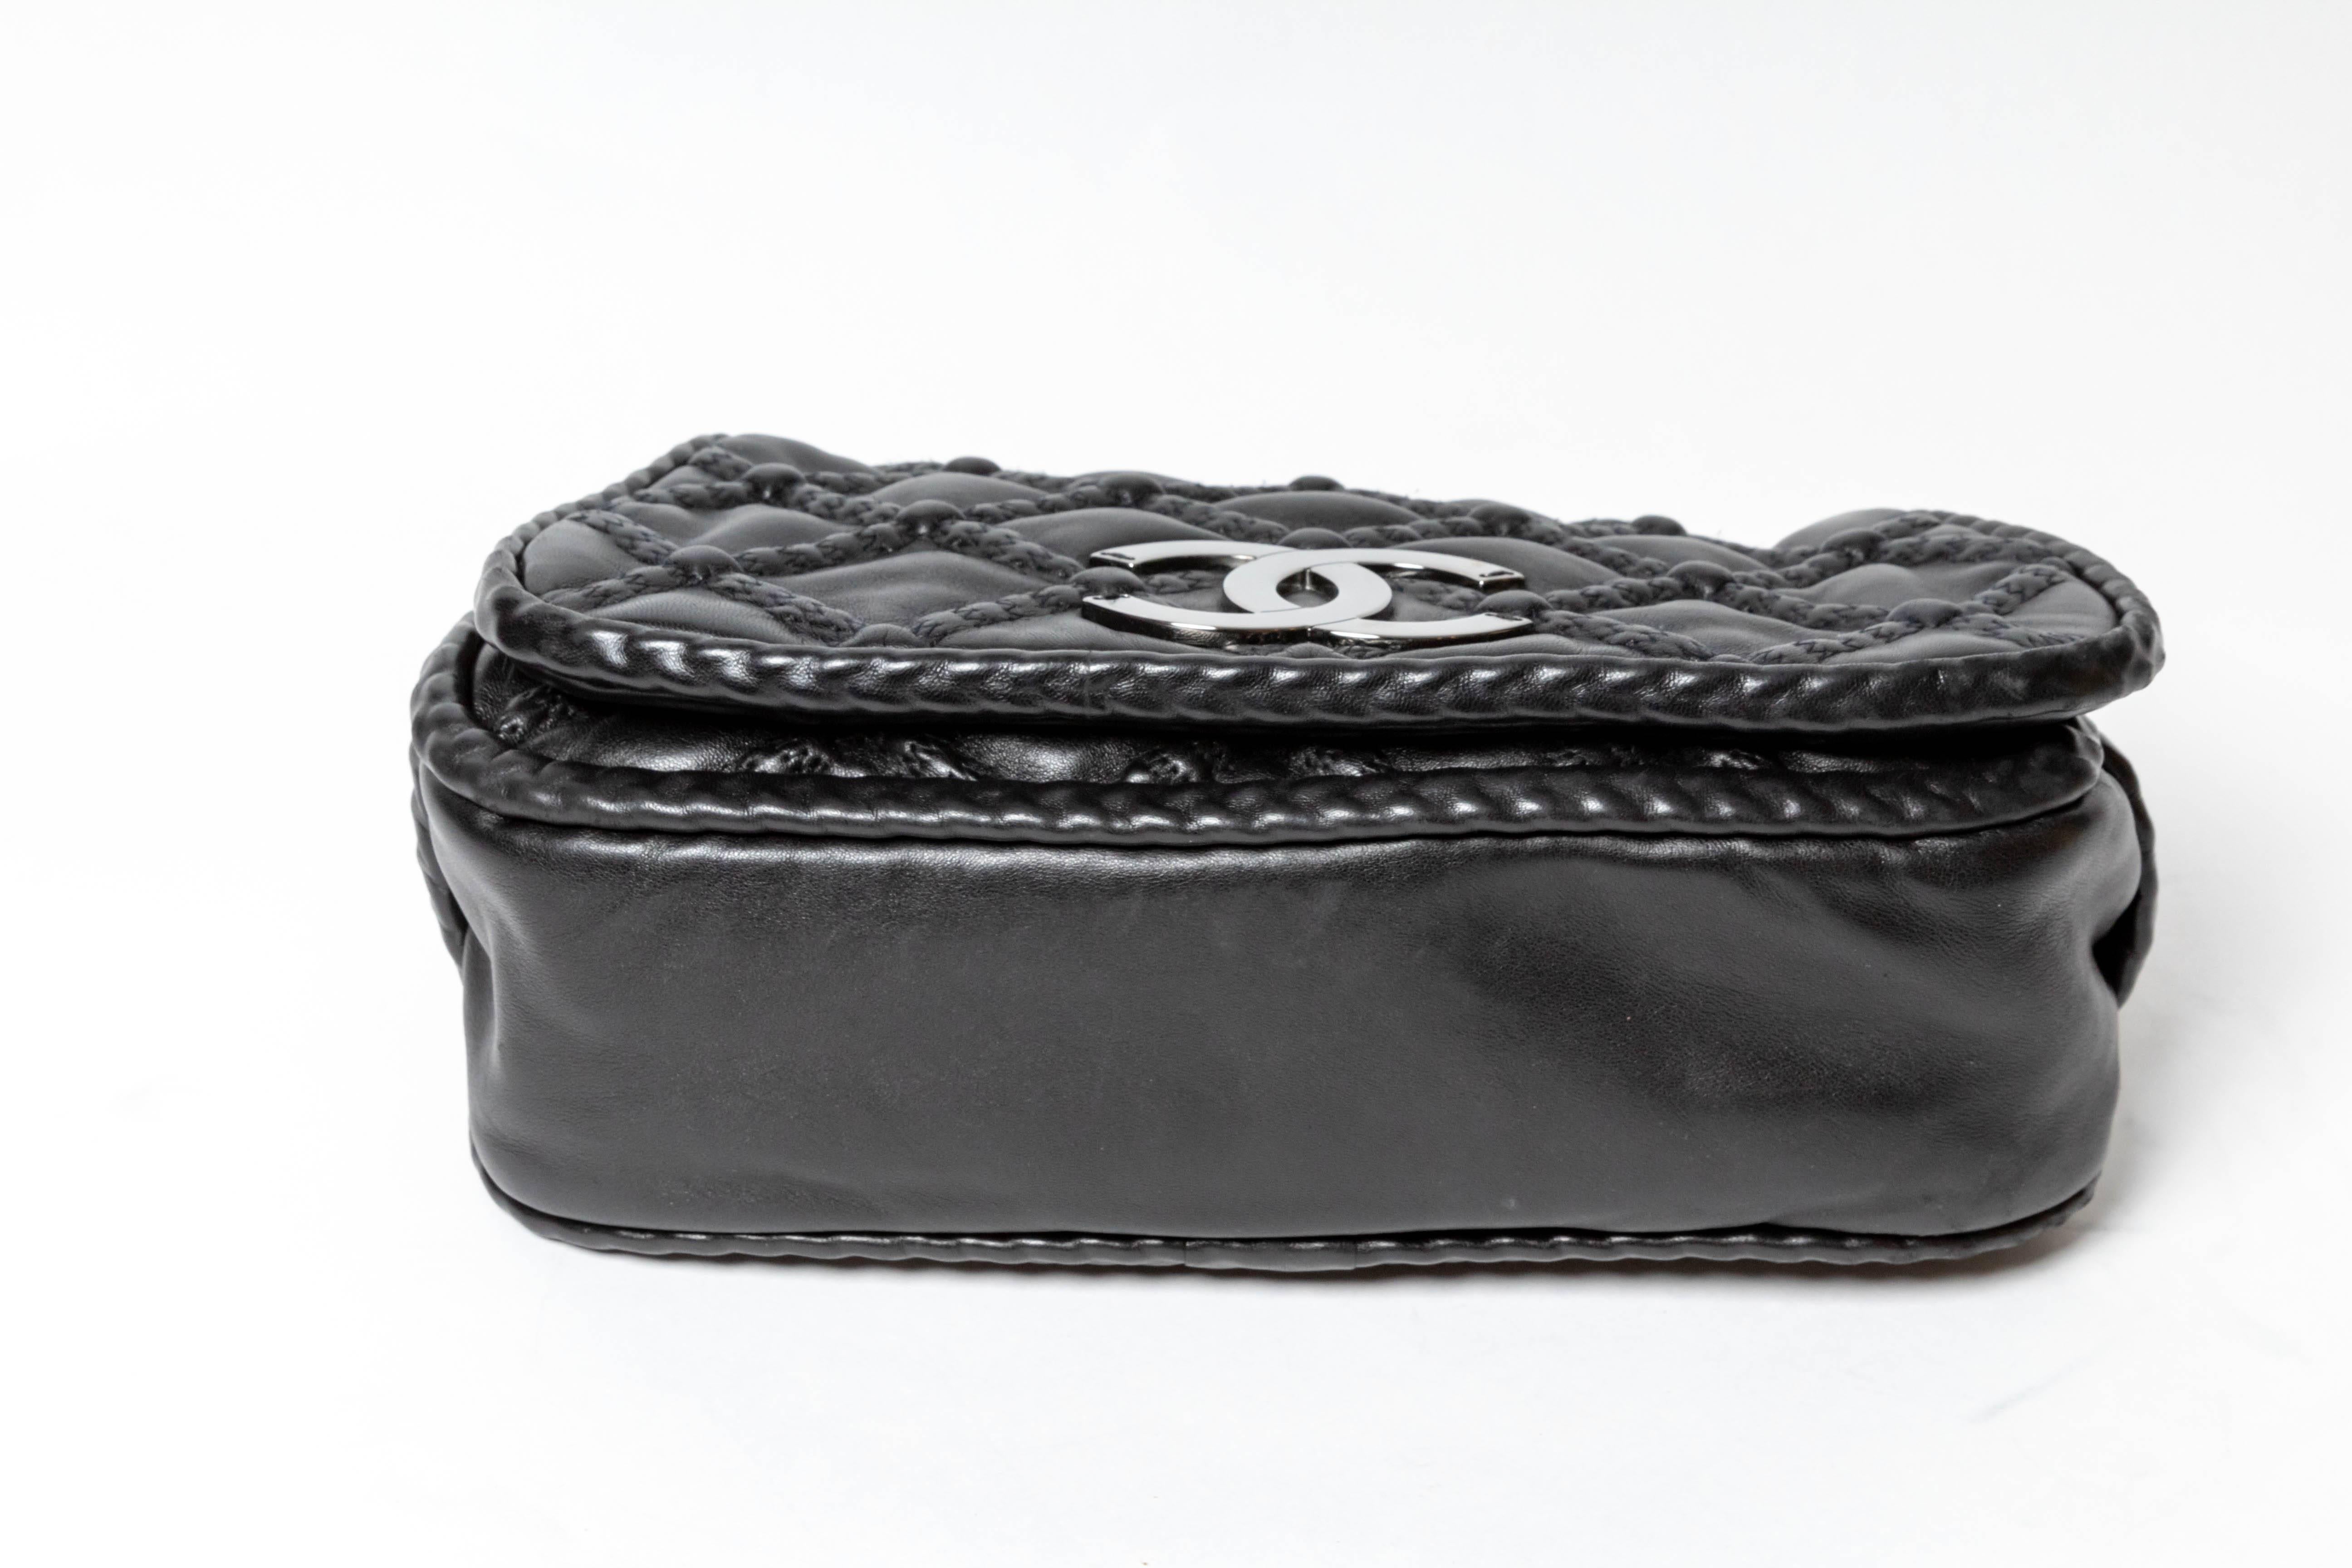 Chanel Covered Chain Lambskin Shoulder Bag in Black with Rhodium Hardware 2